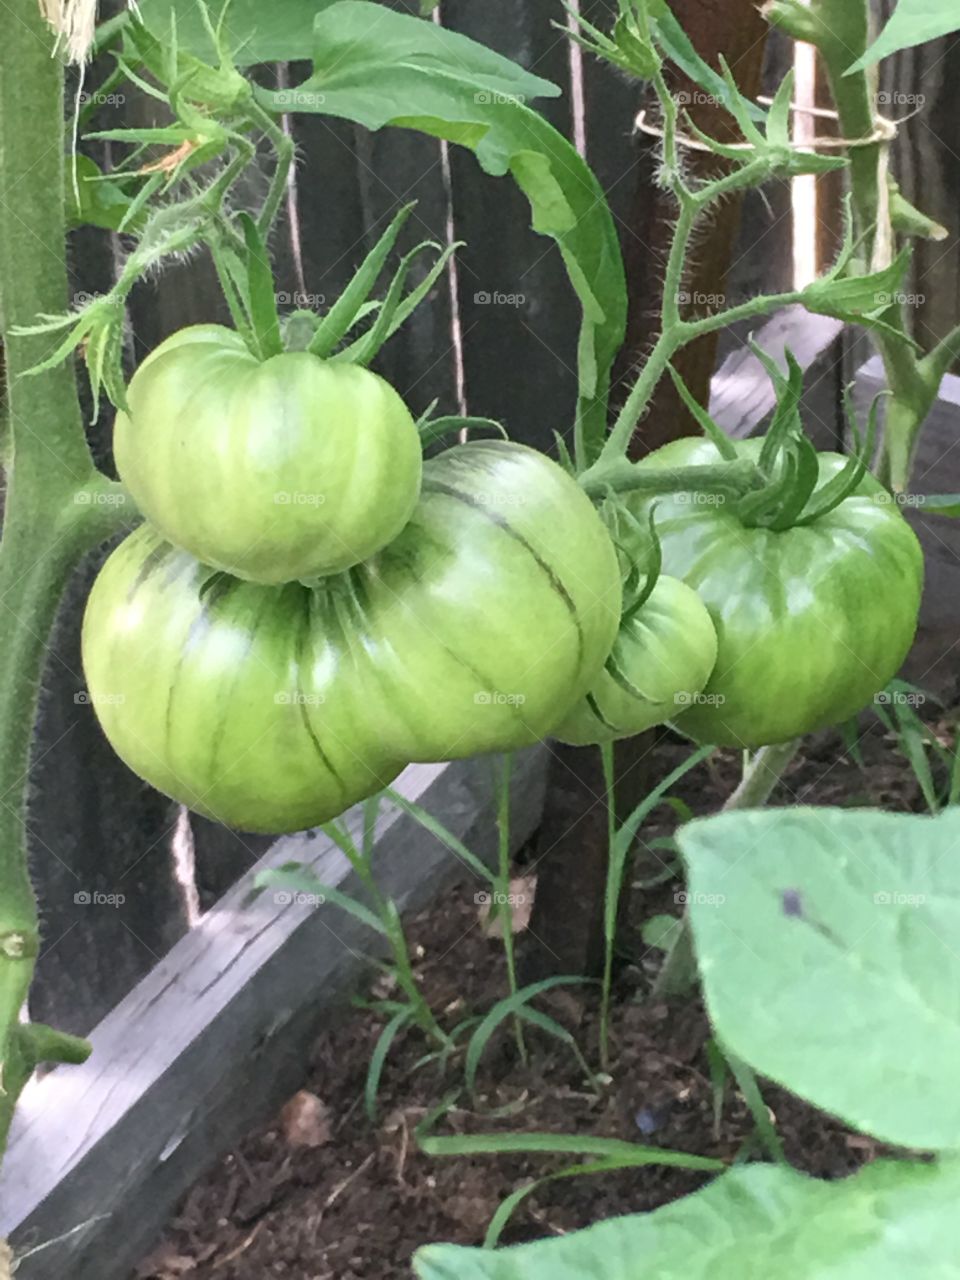 Early Black Beauty tomatoes waiting to ripen. 